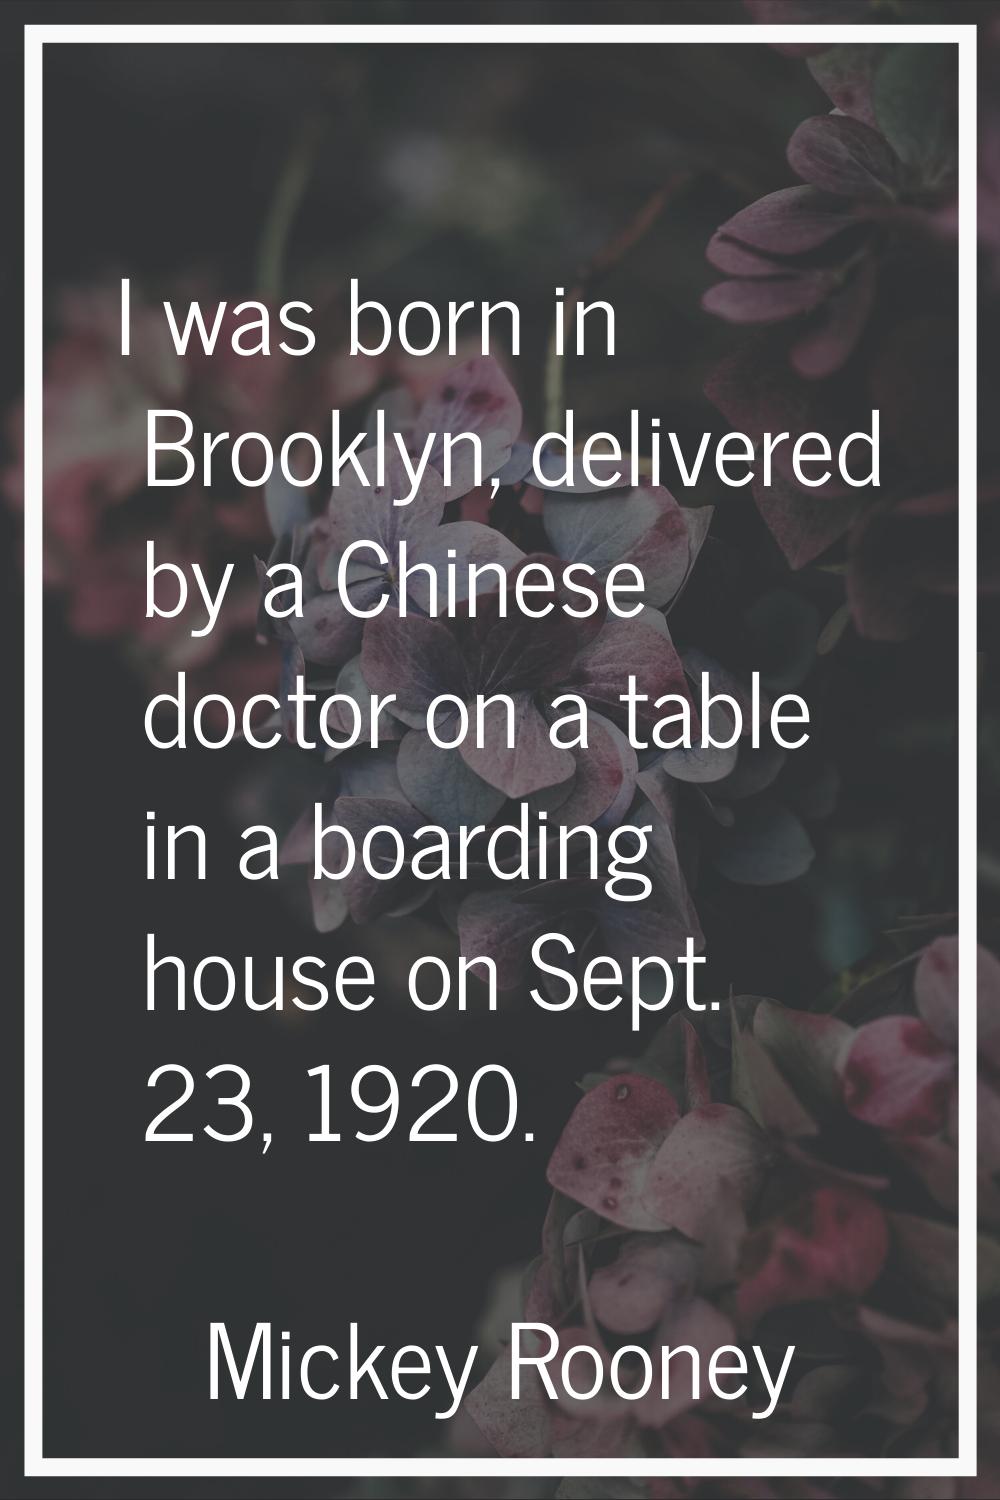 I was born in Brooklyn, delivered by a Chinese doctor on a table in a boarding house on Sept. 23, 1